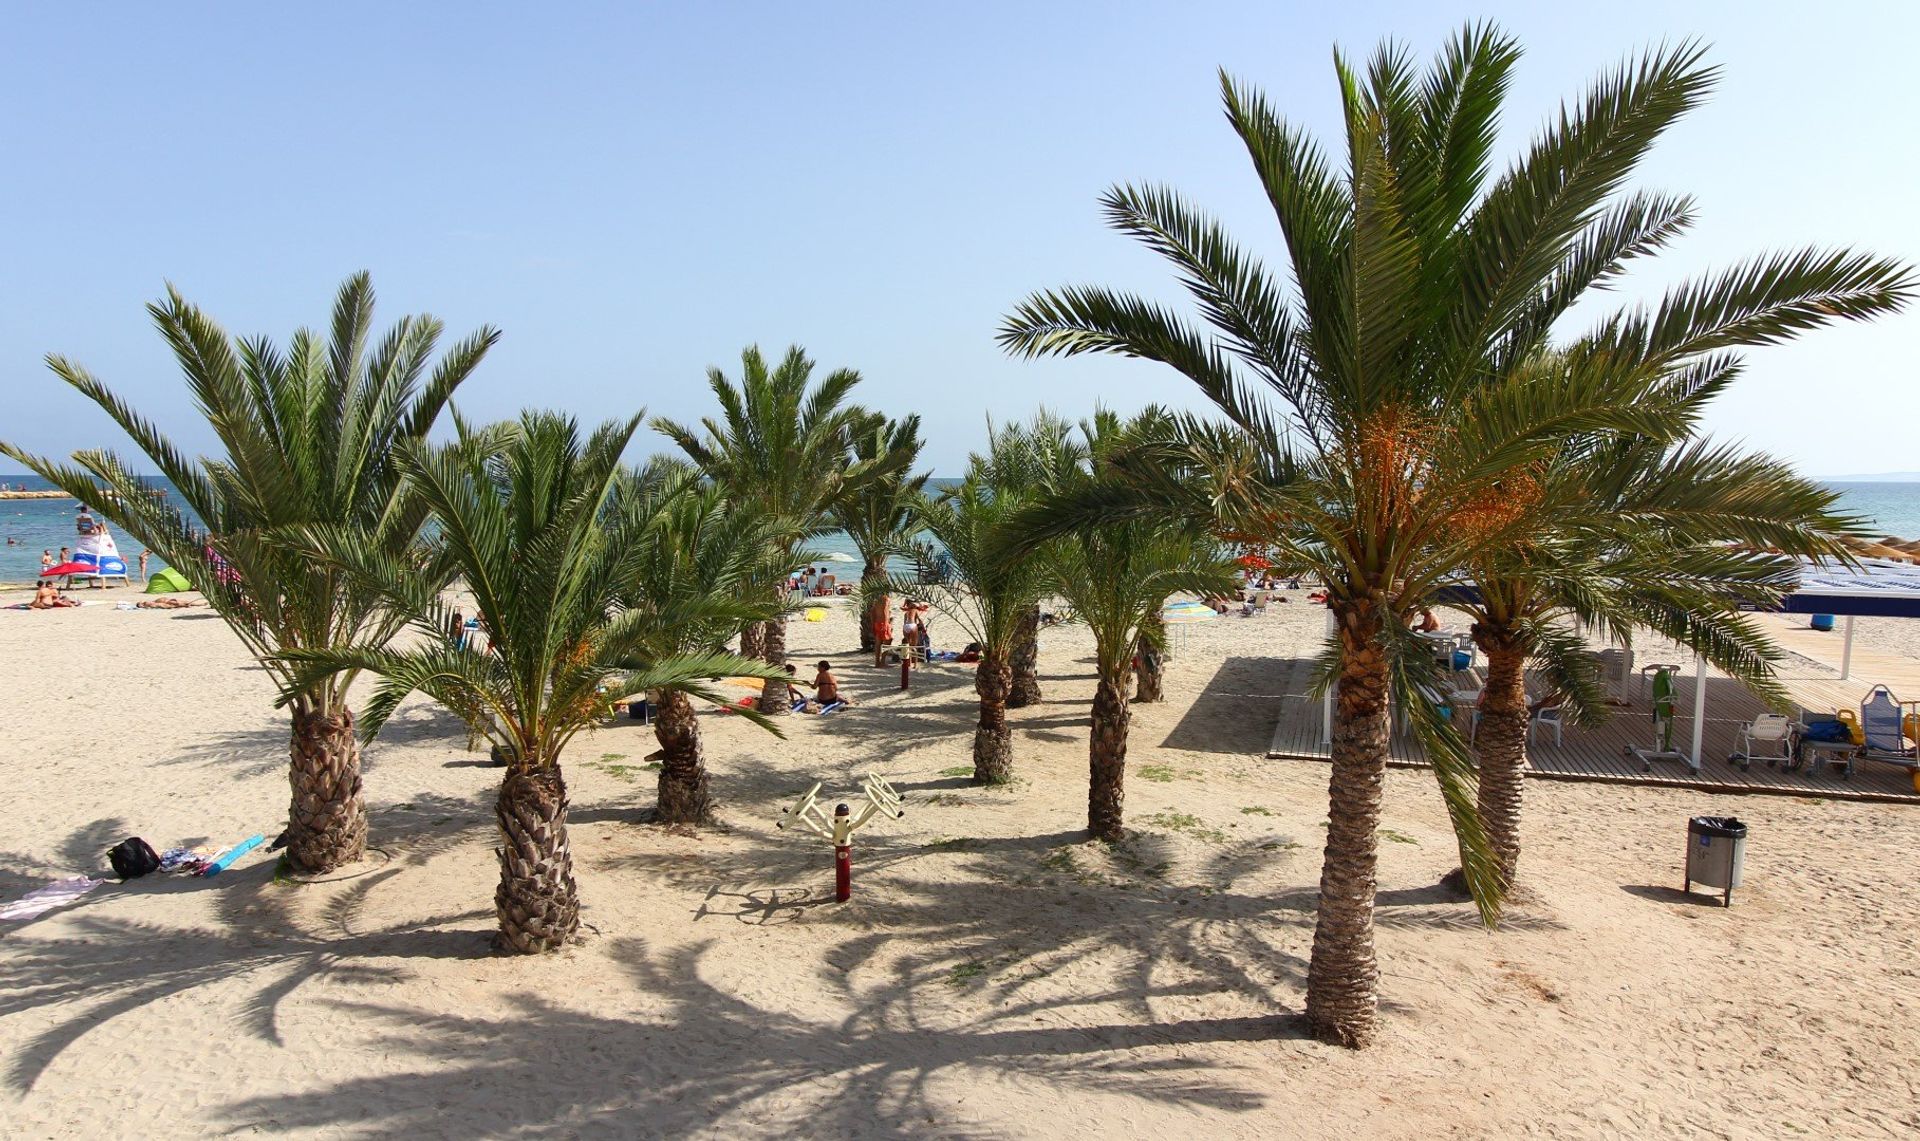 Santa Pola's Playa Levante beach is perfect for families, with its shallow waters and palm tree shade spots